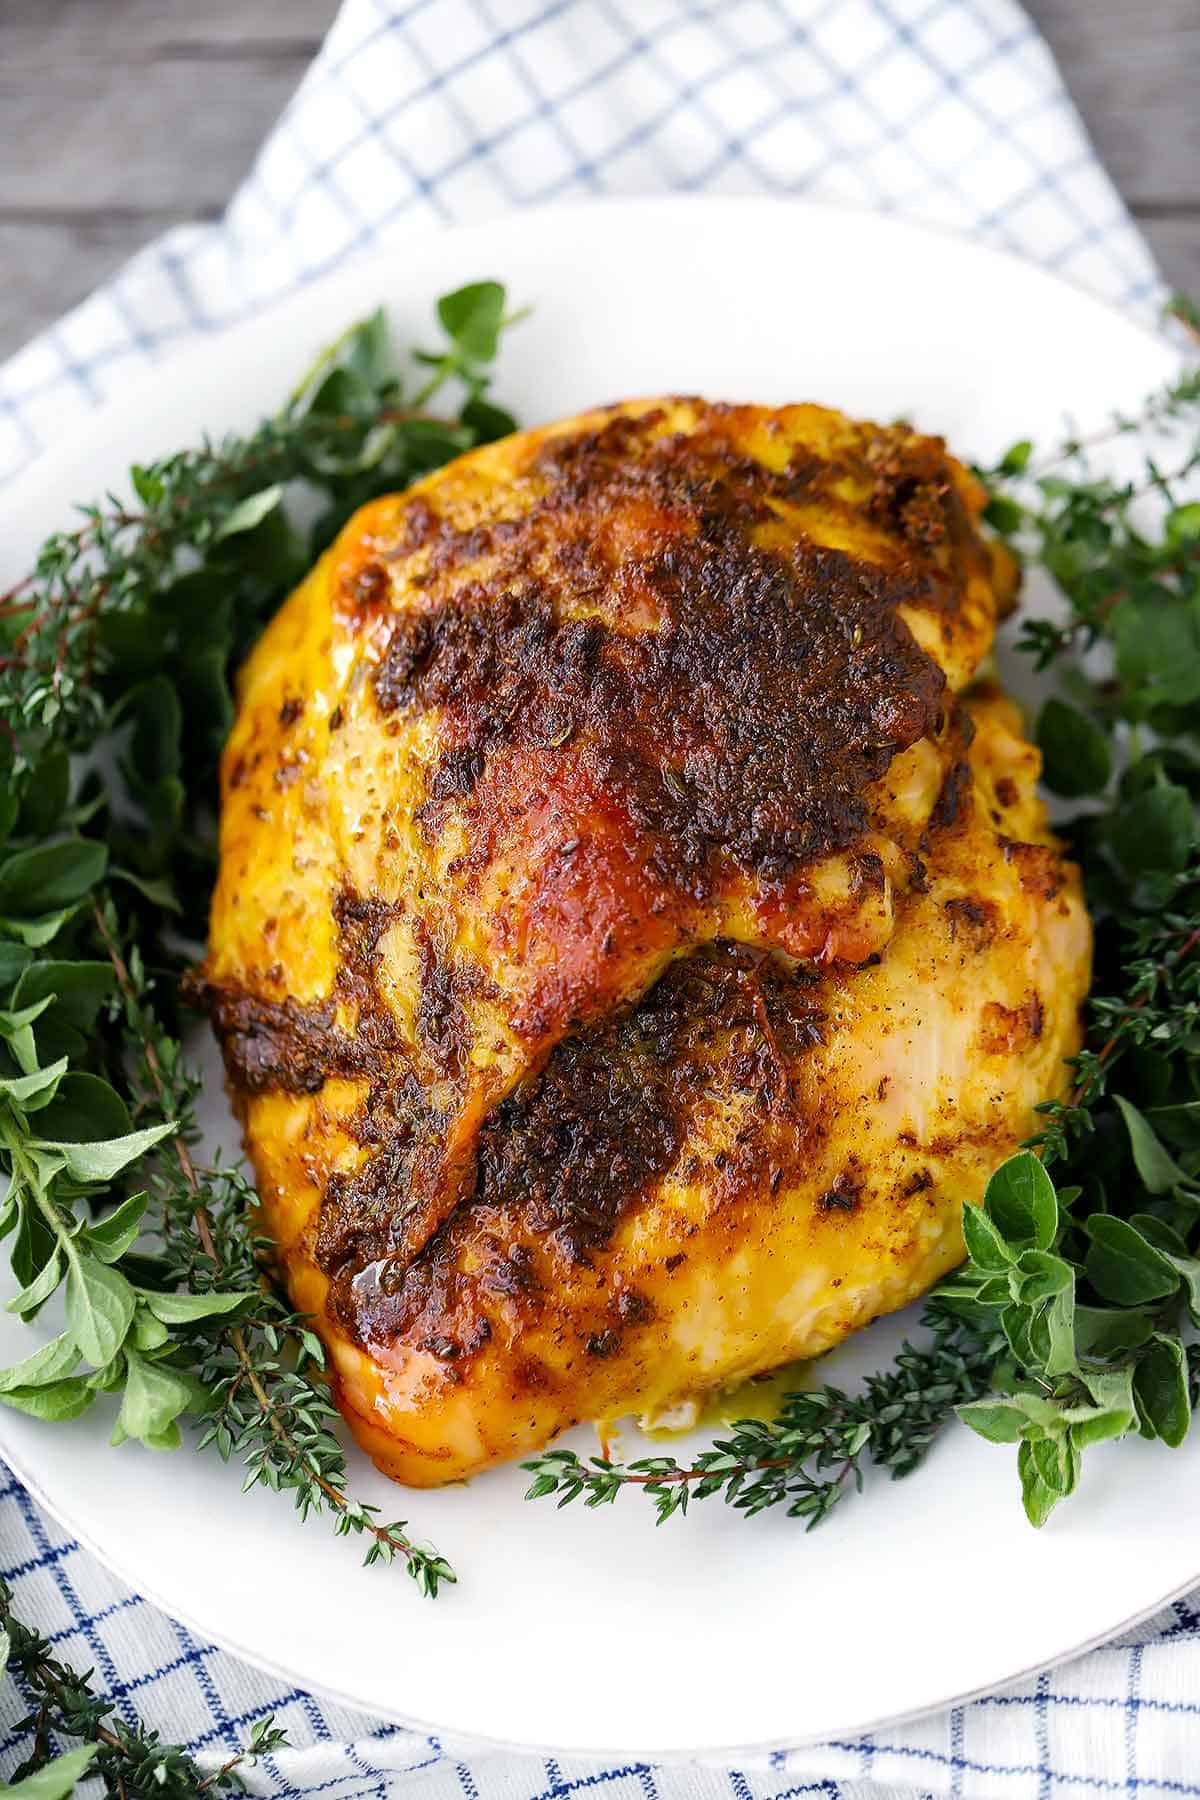 A boneless turkey breast on a white plate with herbs around it.